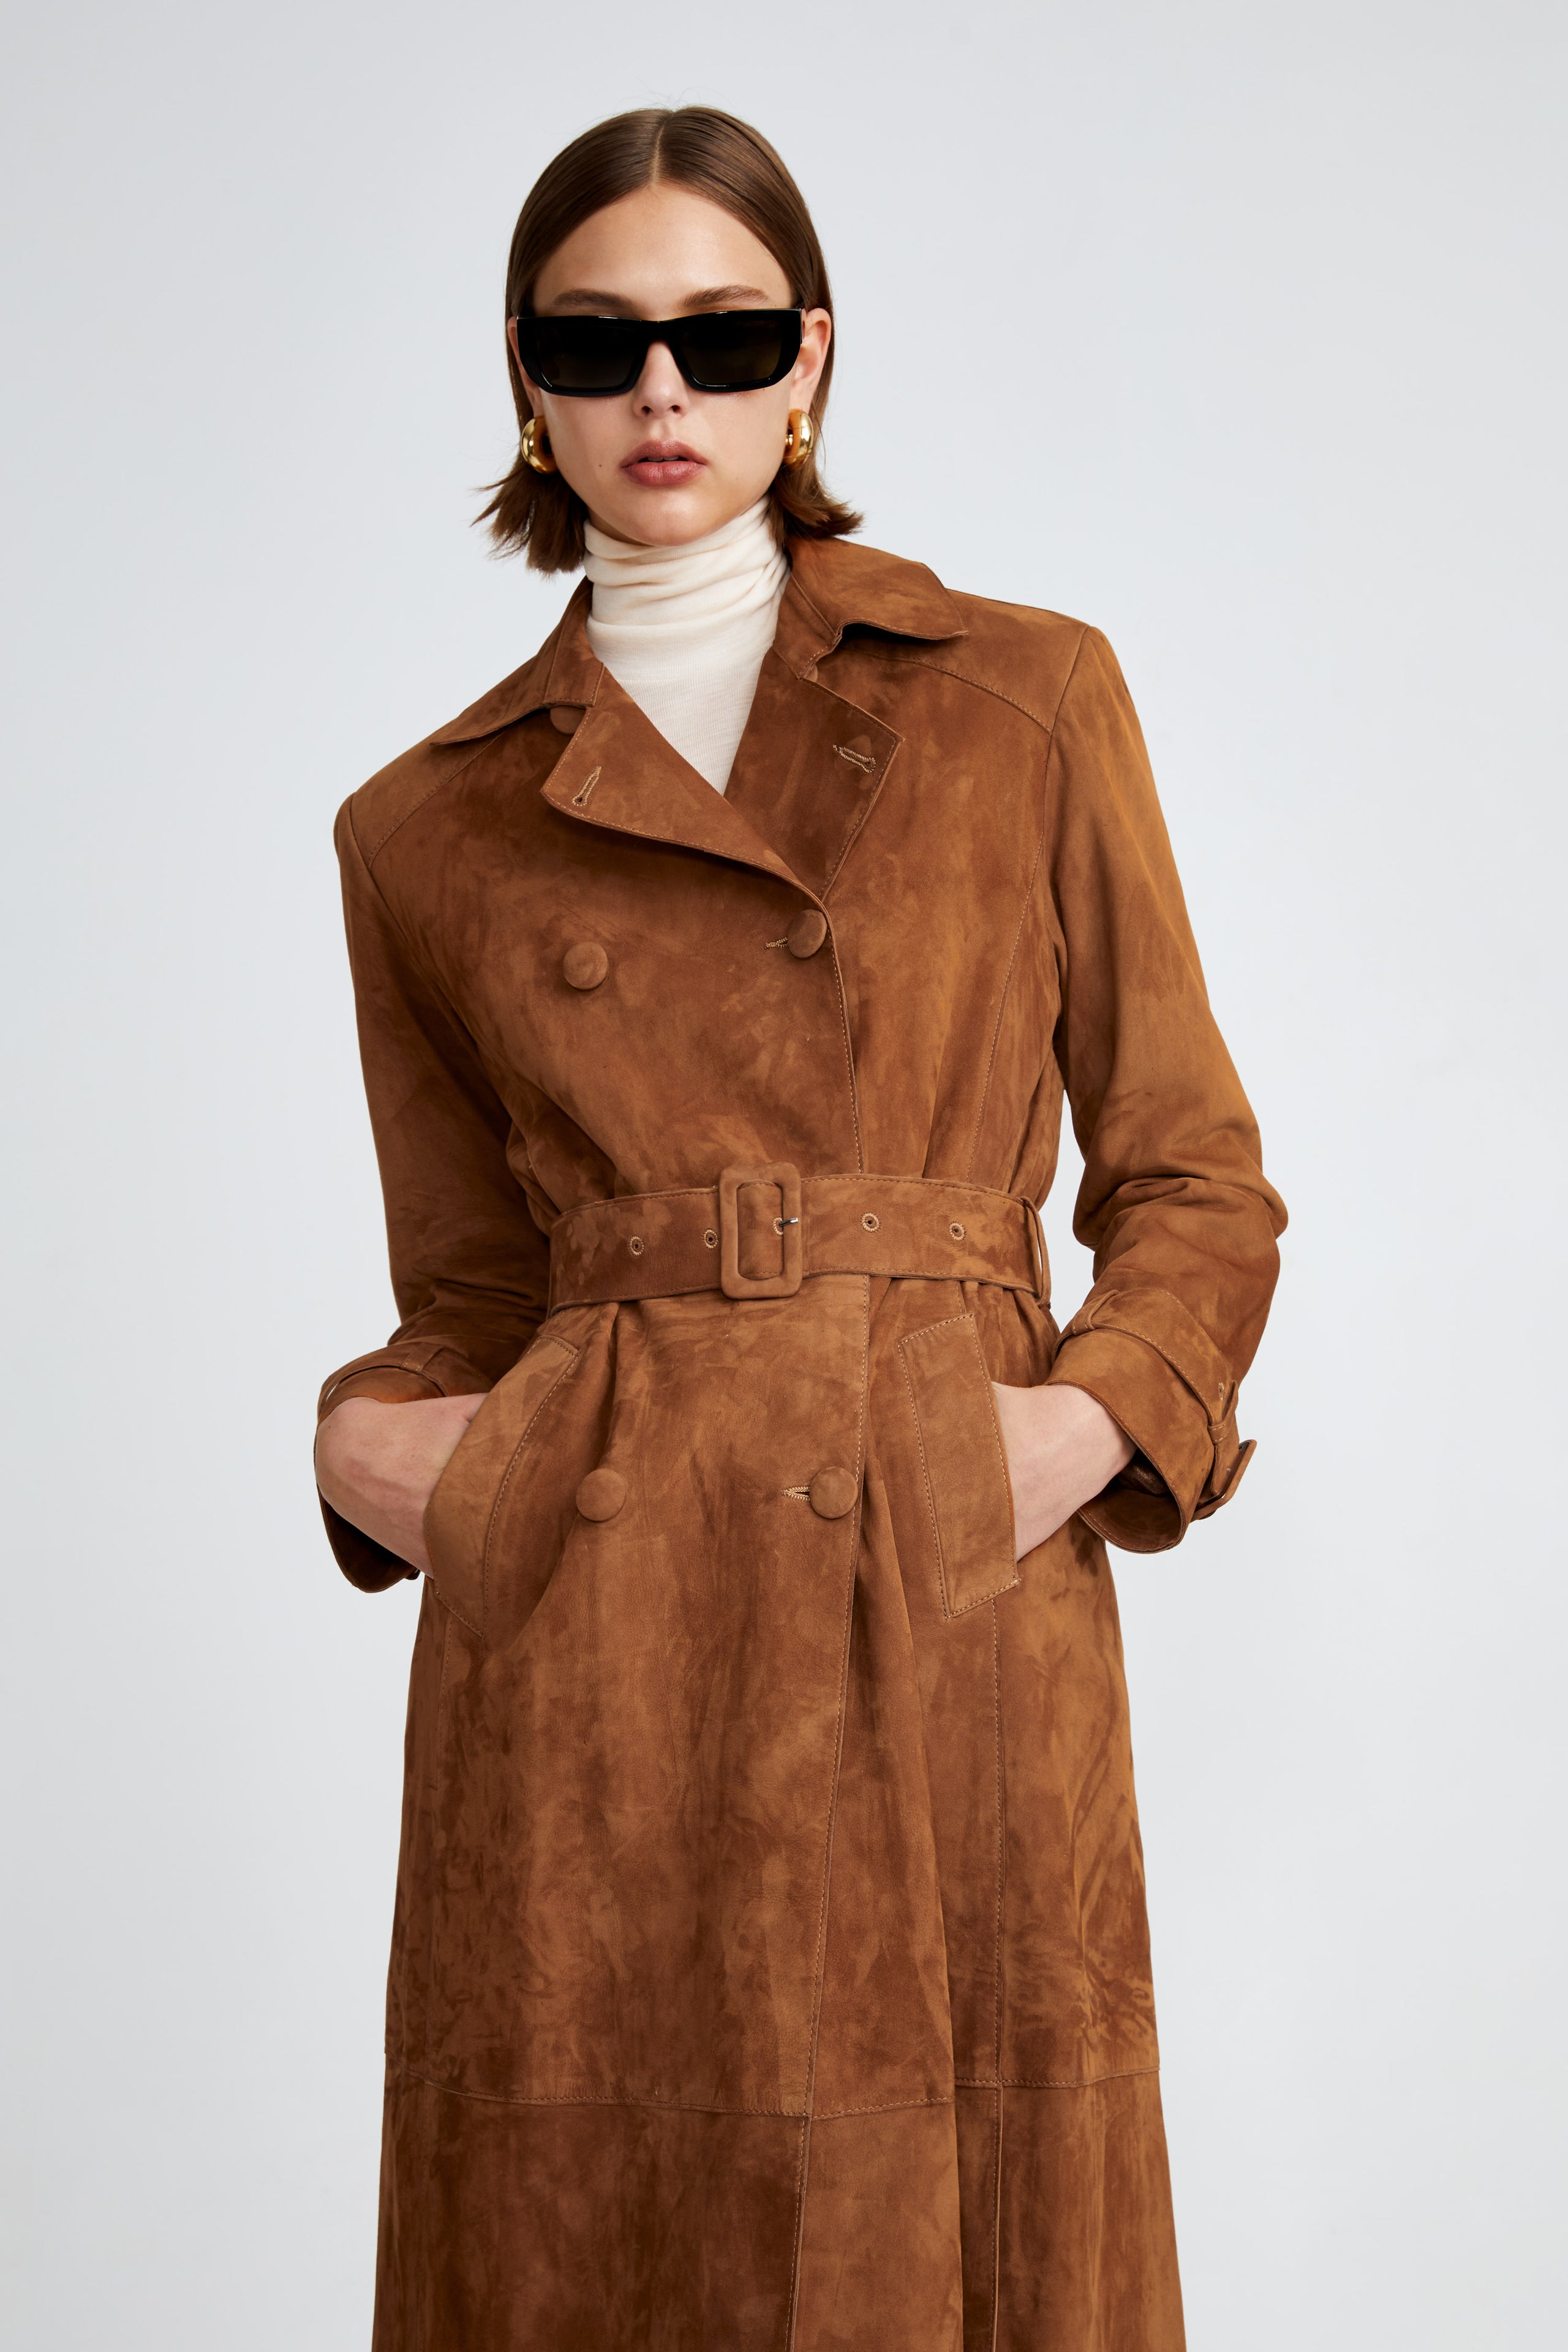 Model is wearing the Tate Caramel Everyday Suede Trench Coat Close Up